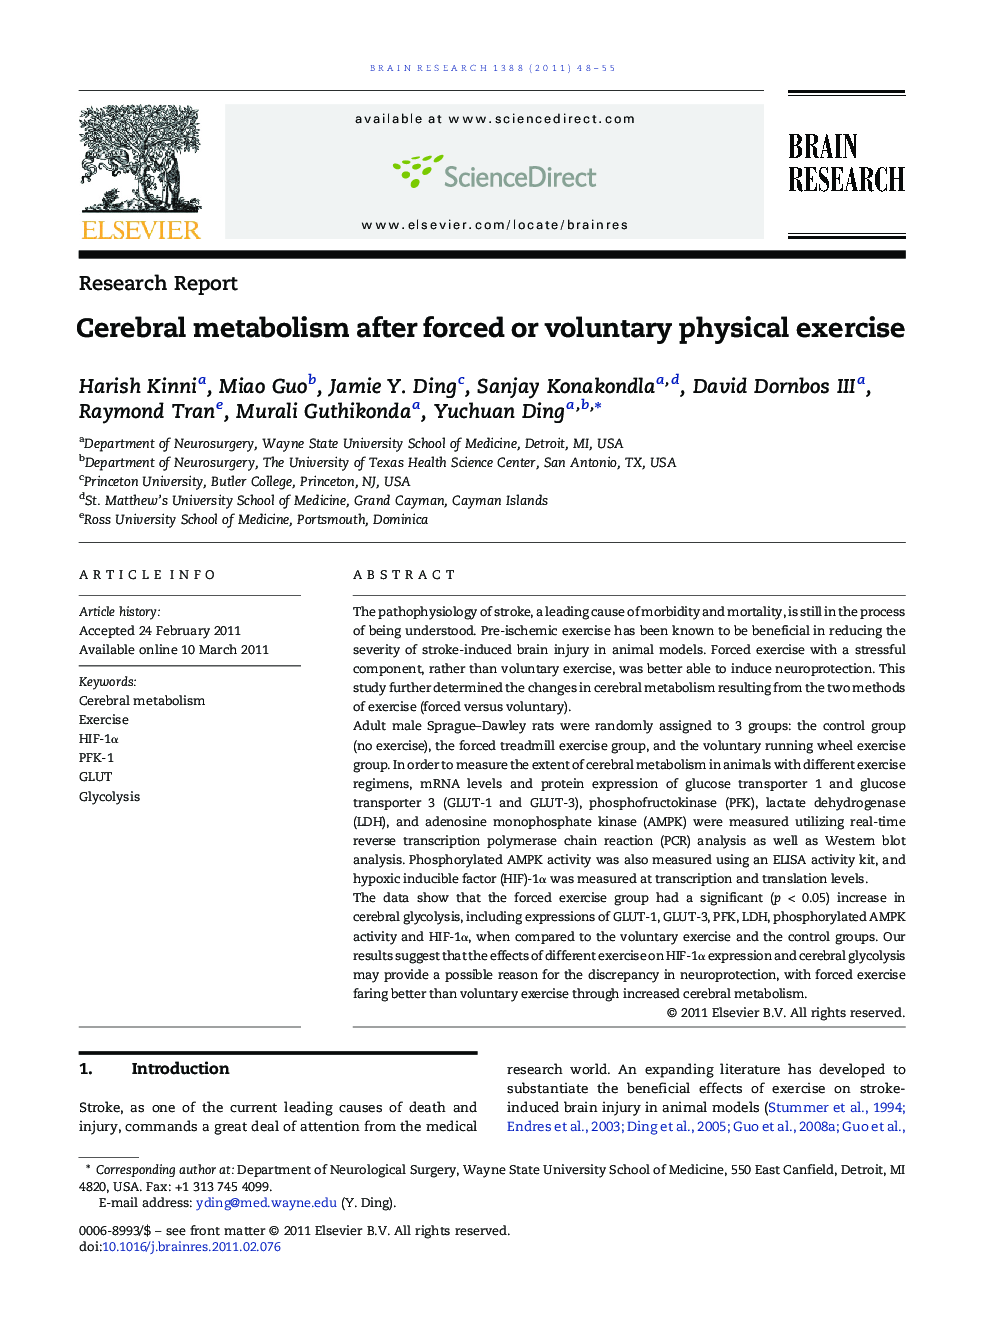 Research ReportCerebral metabolism after forced or voluntary physical exercise